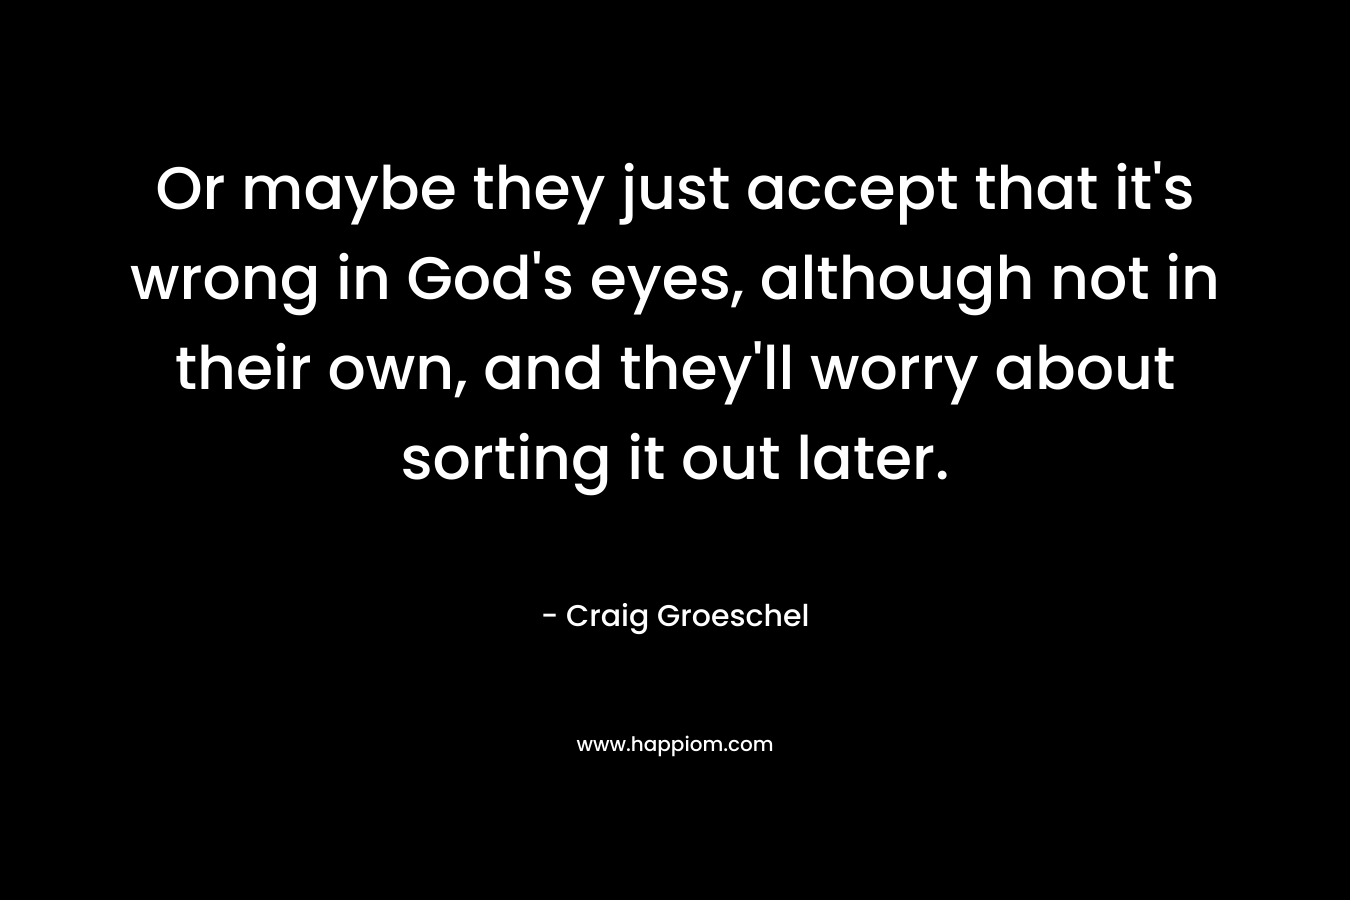 Or maybe they just accept that it’s wrong in God’s eyes, although not in their own, and they’ll worry about sorting it out later. – Craig Groeschel